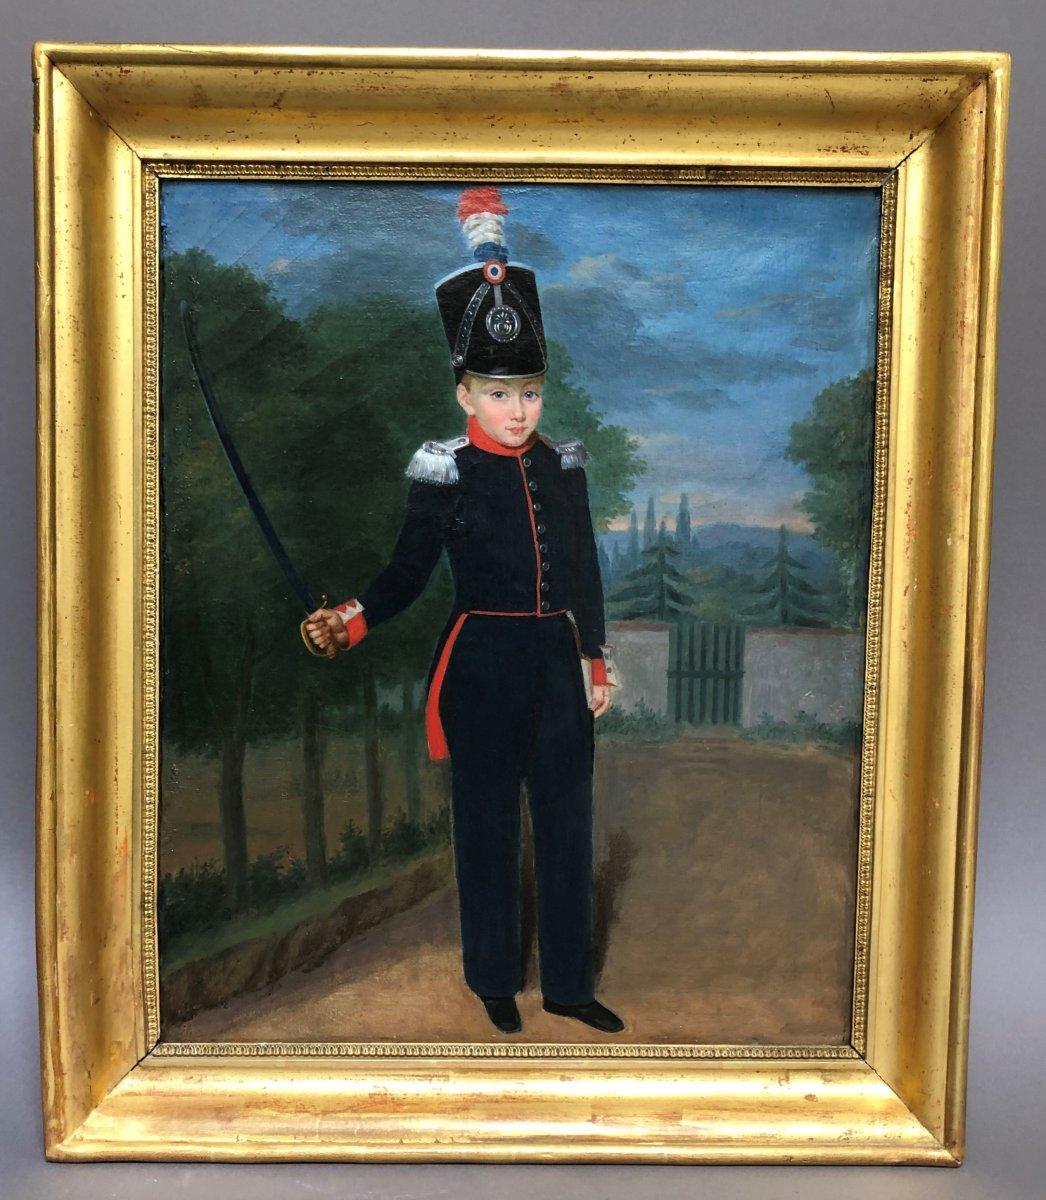 Oiled Painting of a Child in Military Costume